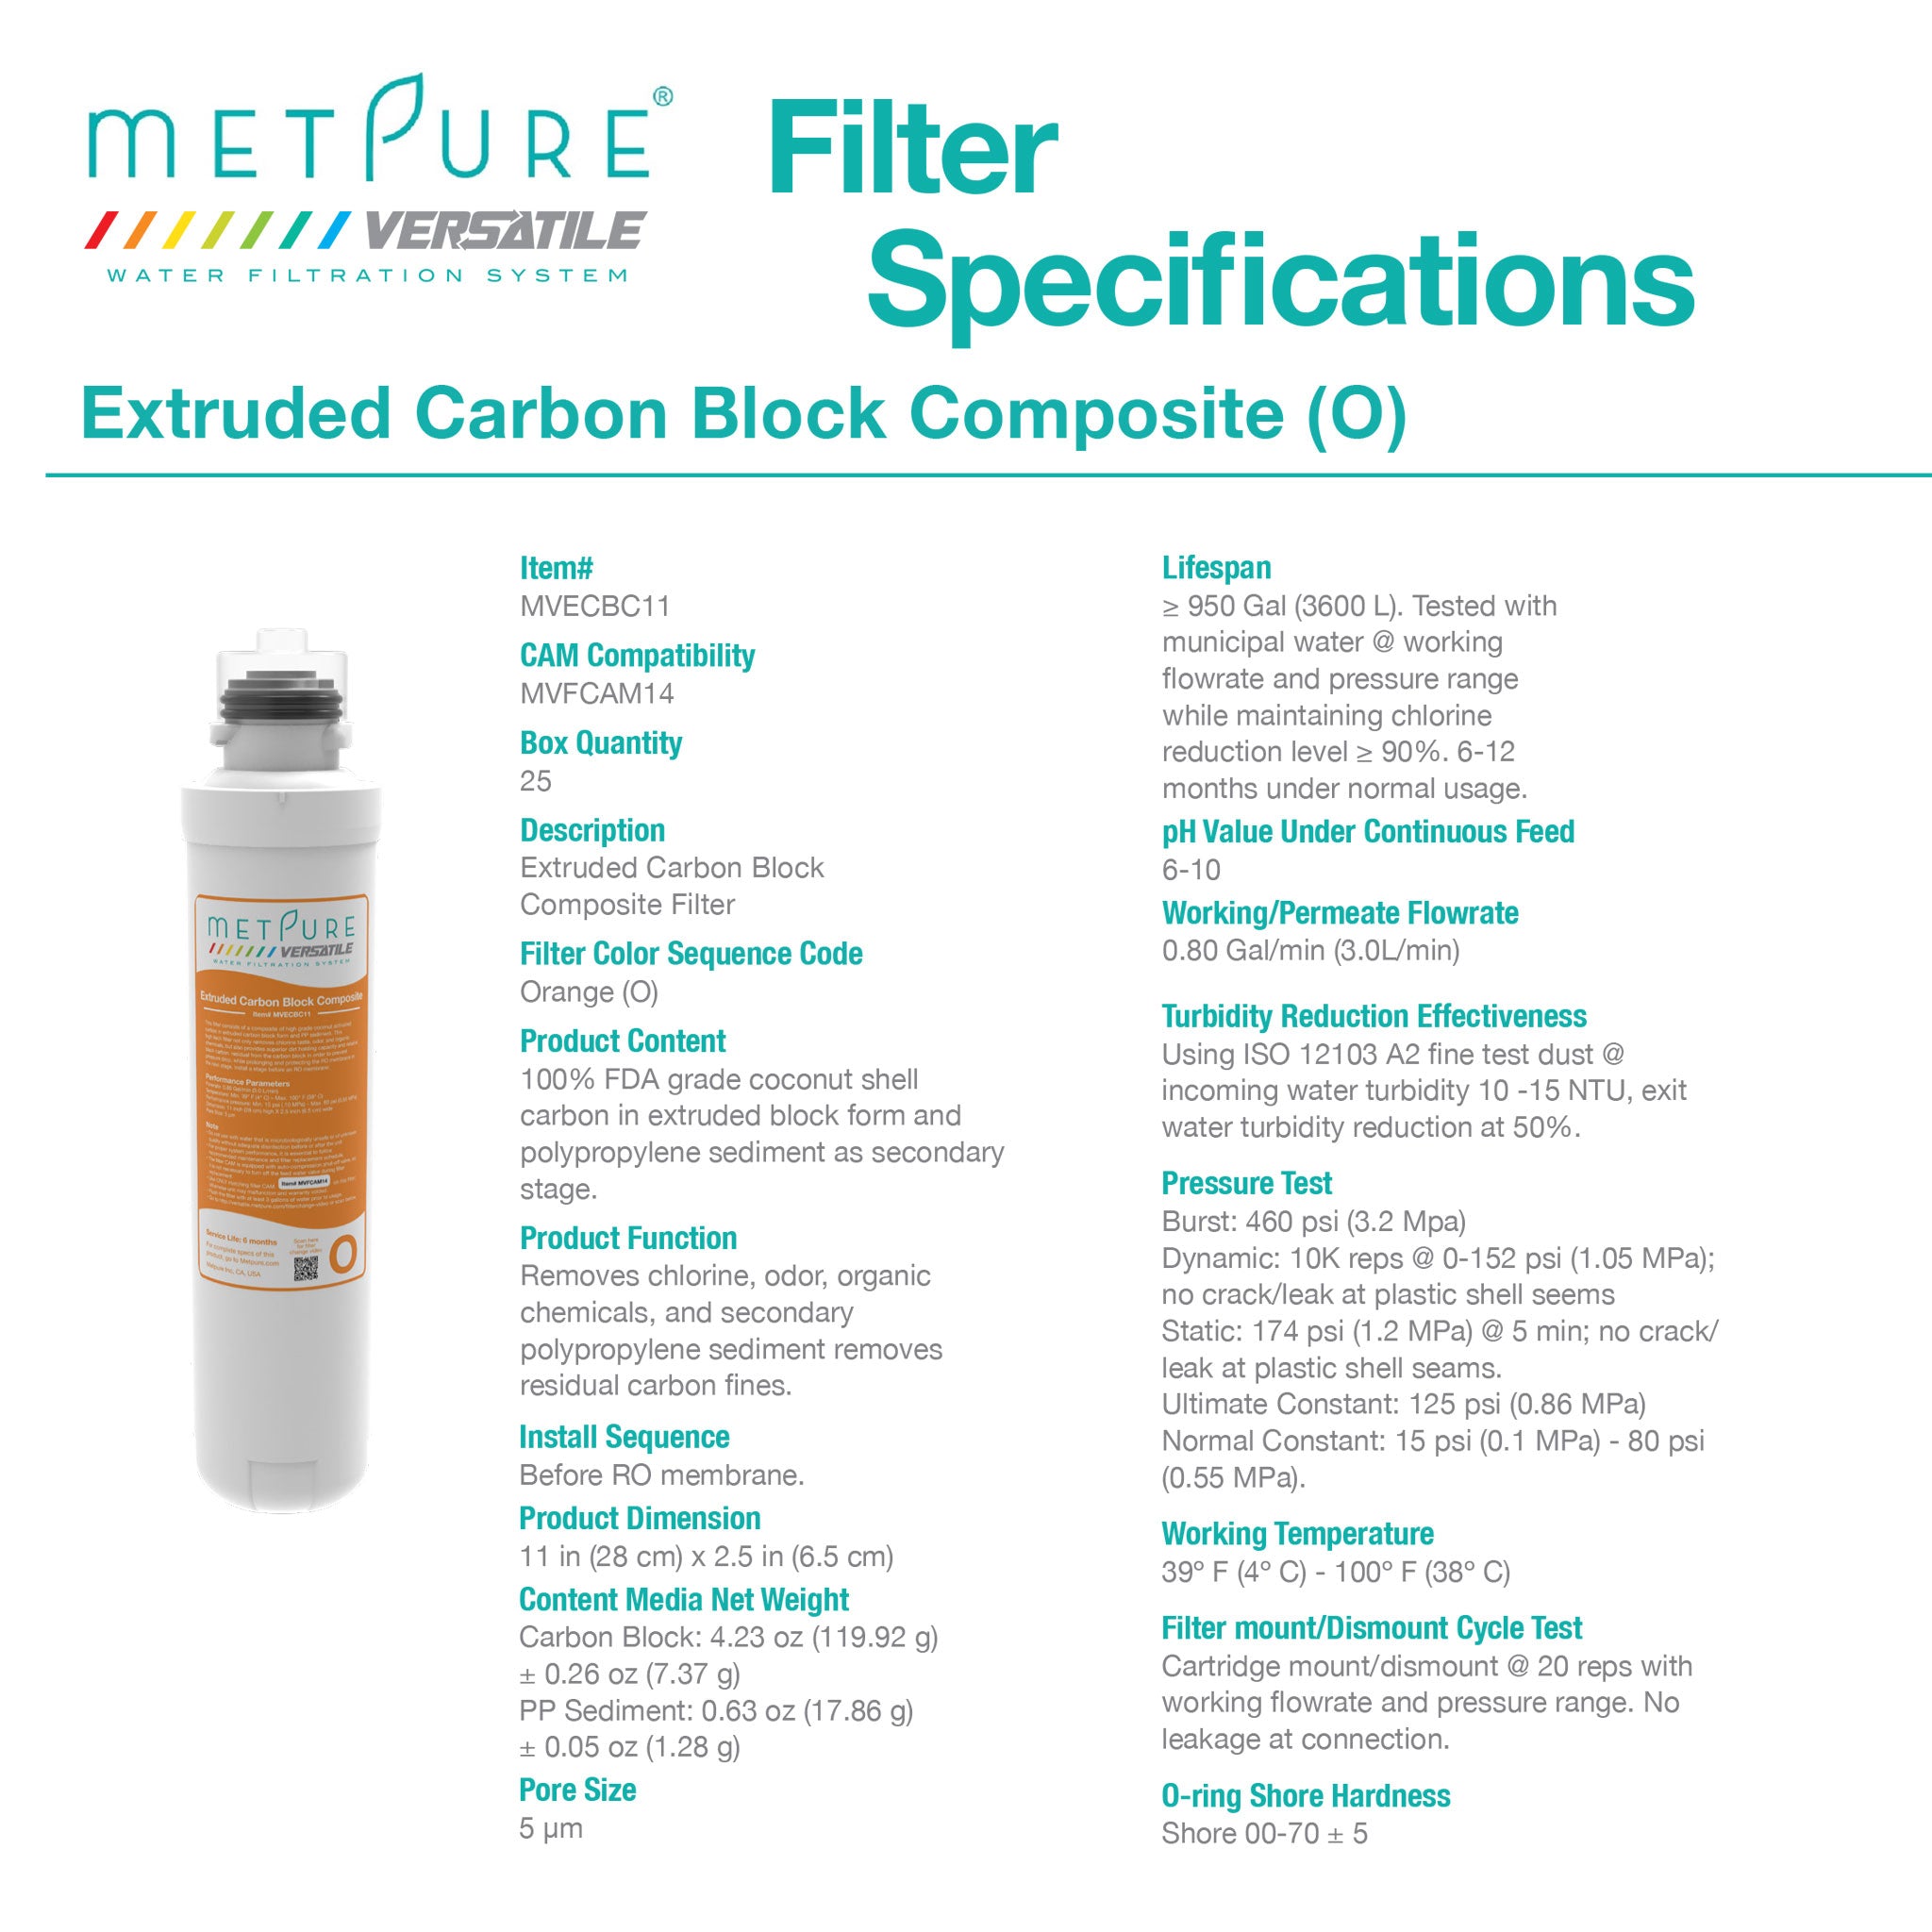 Metpure Versatile Carbon Block CTO + PP - Orange Composite Filter, 5 Micron, Quick Twist (O), Drinking Water Filtration System filter, Replacement Cartridge, 11" x 2.5"